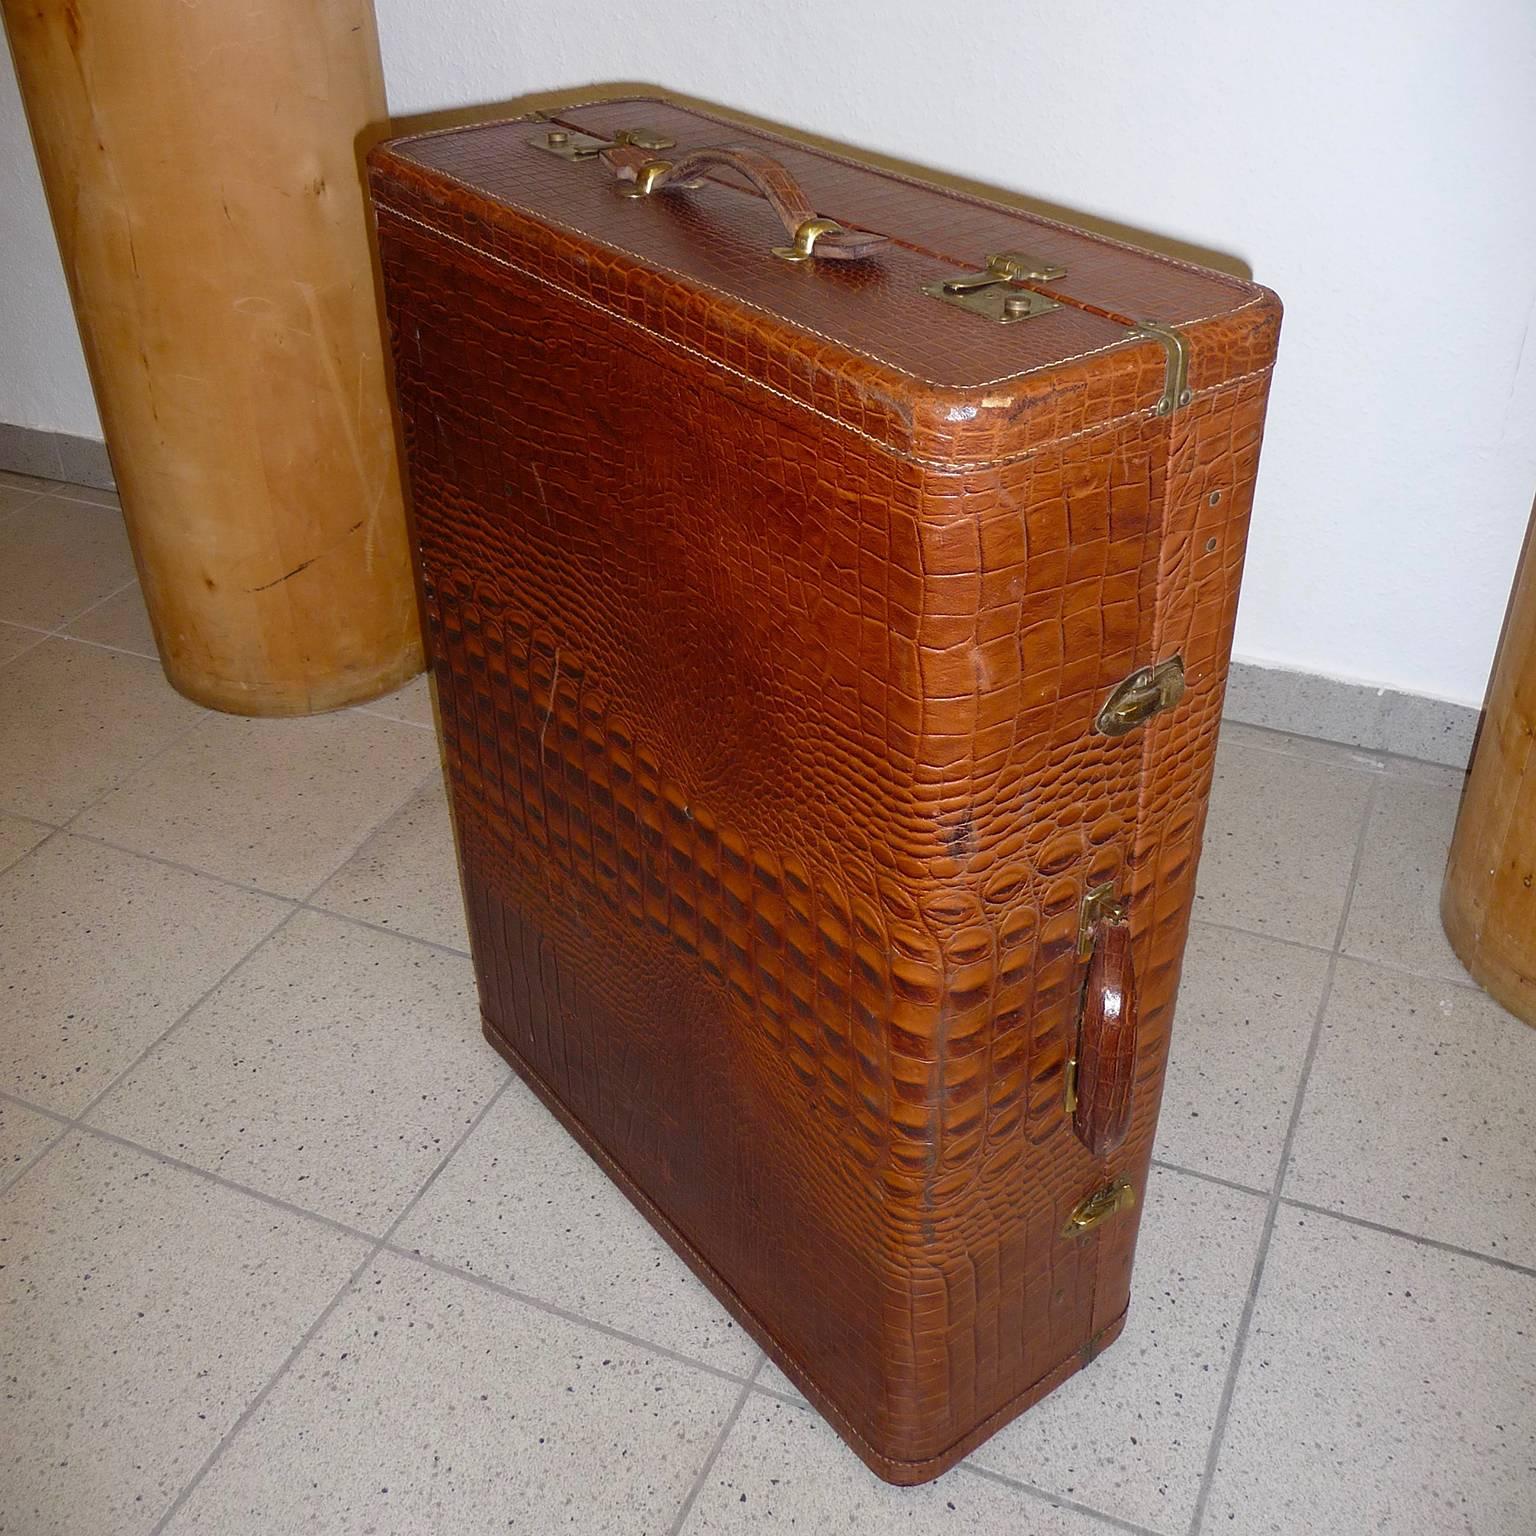 Canadian Vintage Genuine Leather Eveleigh Luggage in Alligator Look